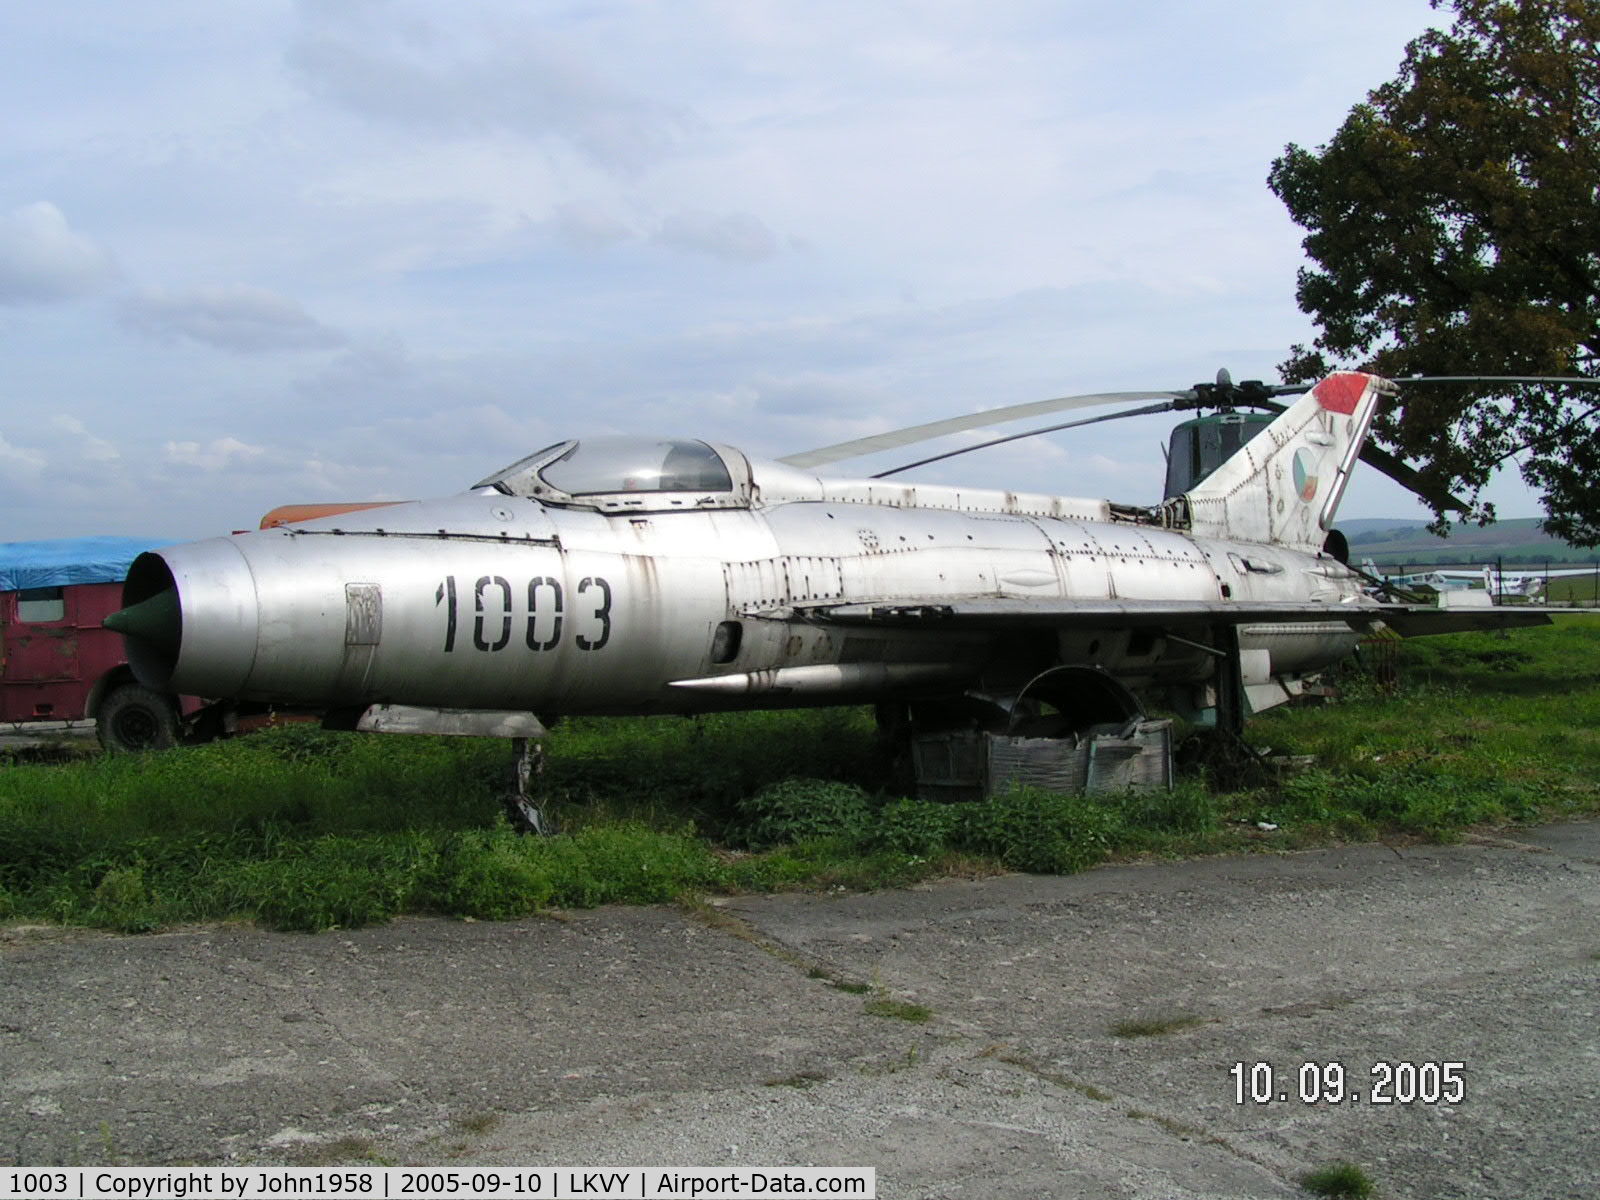 1003, Mikoyan-Gurevich MiG-21F-13 C/N 061003, Another early Mig 21